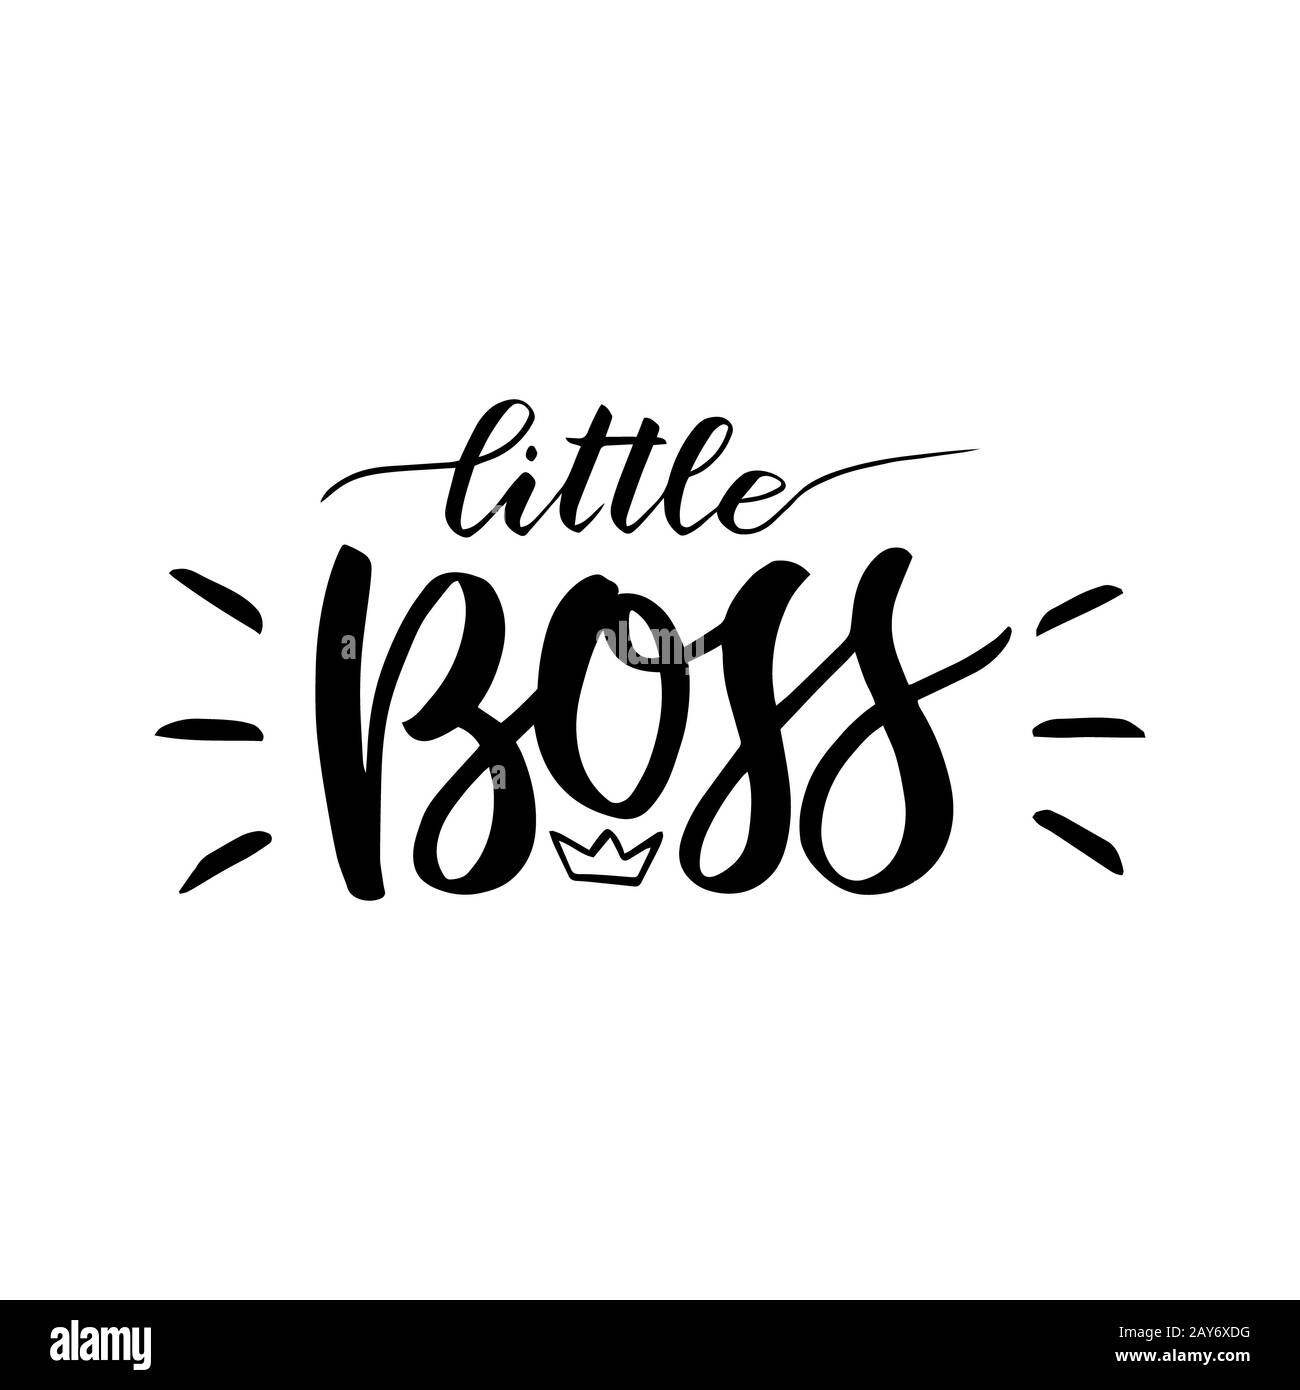 little boss. Hand lettering quotes to print on babies clothes, nursery decorations bags, posters, invitations, cards. illustration. Photo overlay. Mod Stock Photo